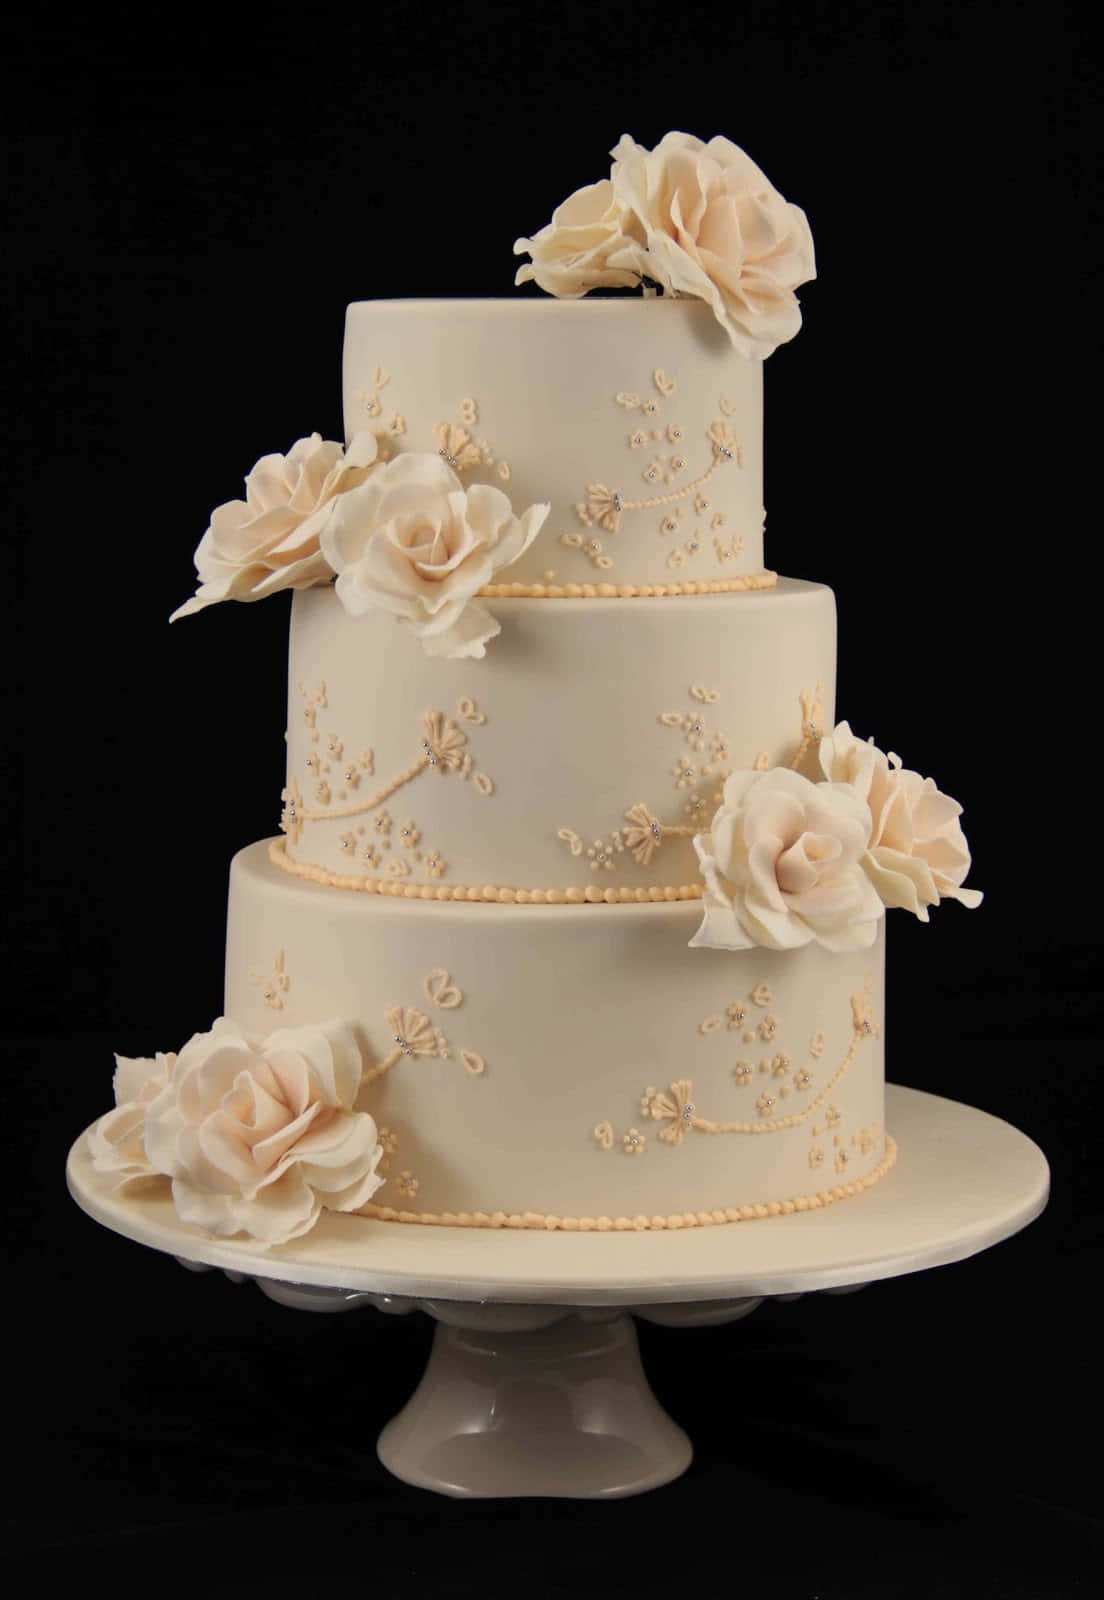 A White Wedding Cake With Cream Roses On Top